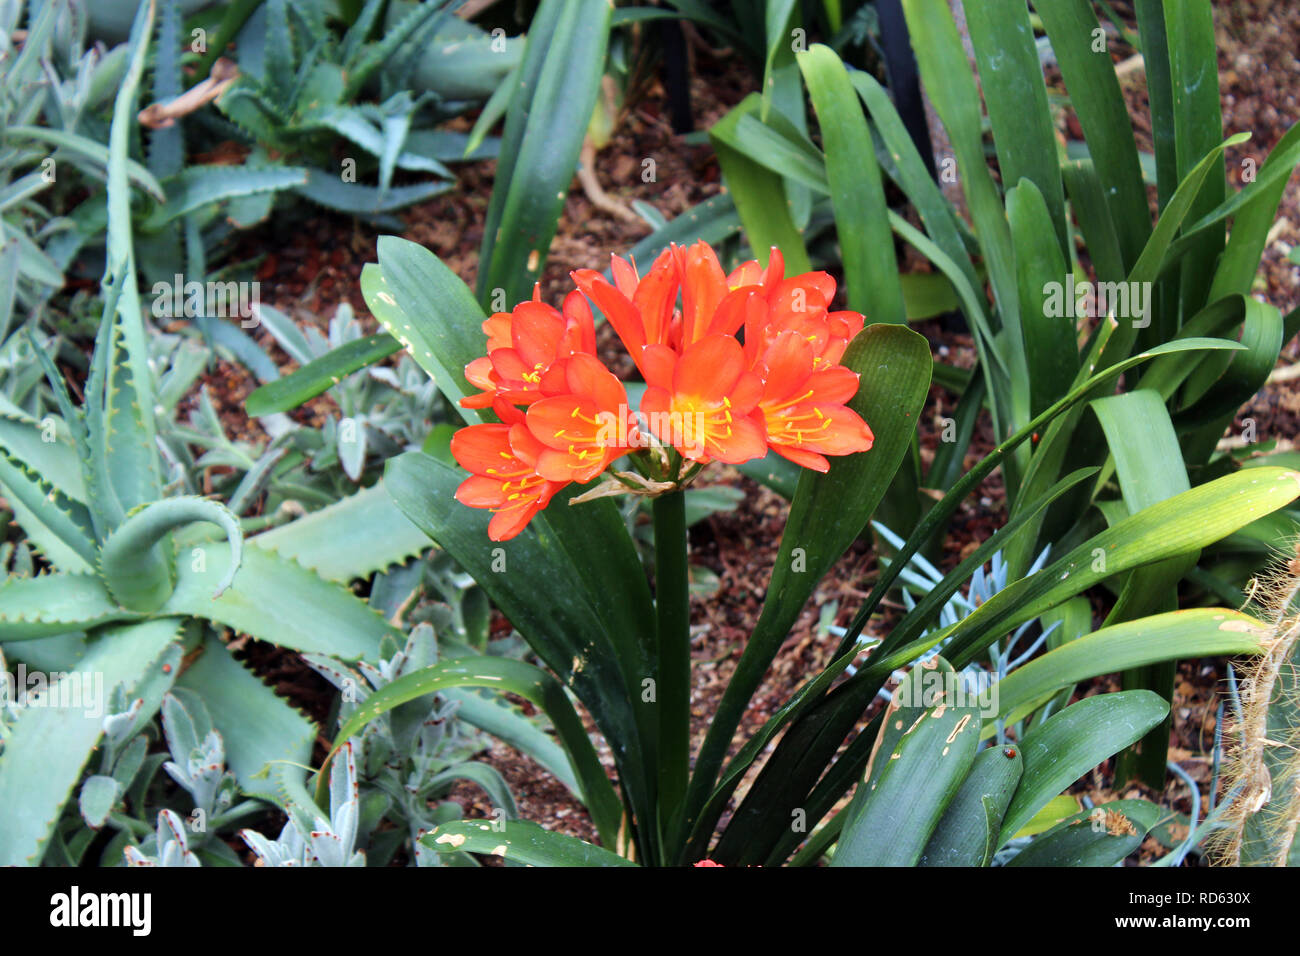 A Natal lily, Clivia miniata, in full bloom surrounded by aloe vera plants Stock Photo